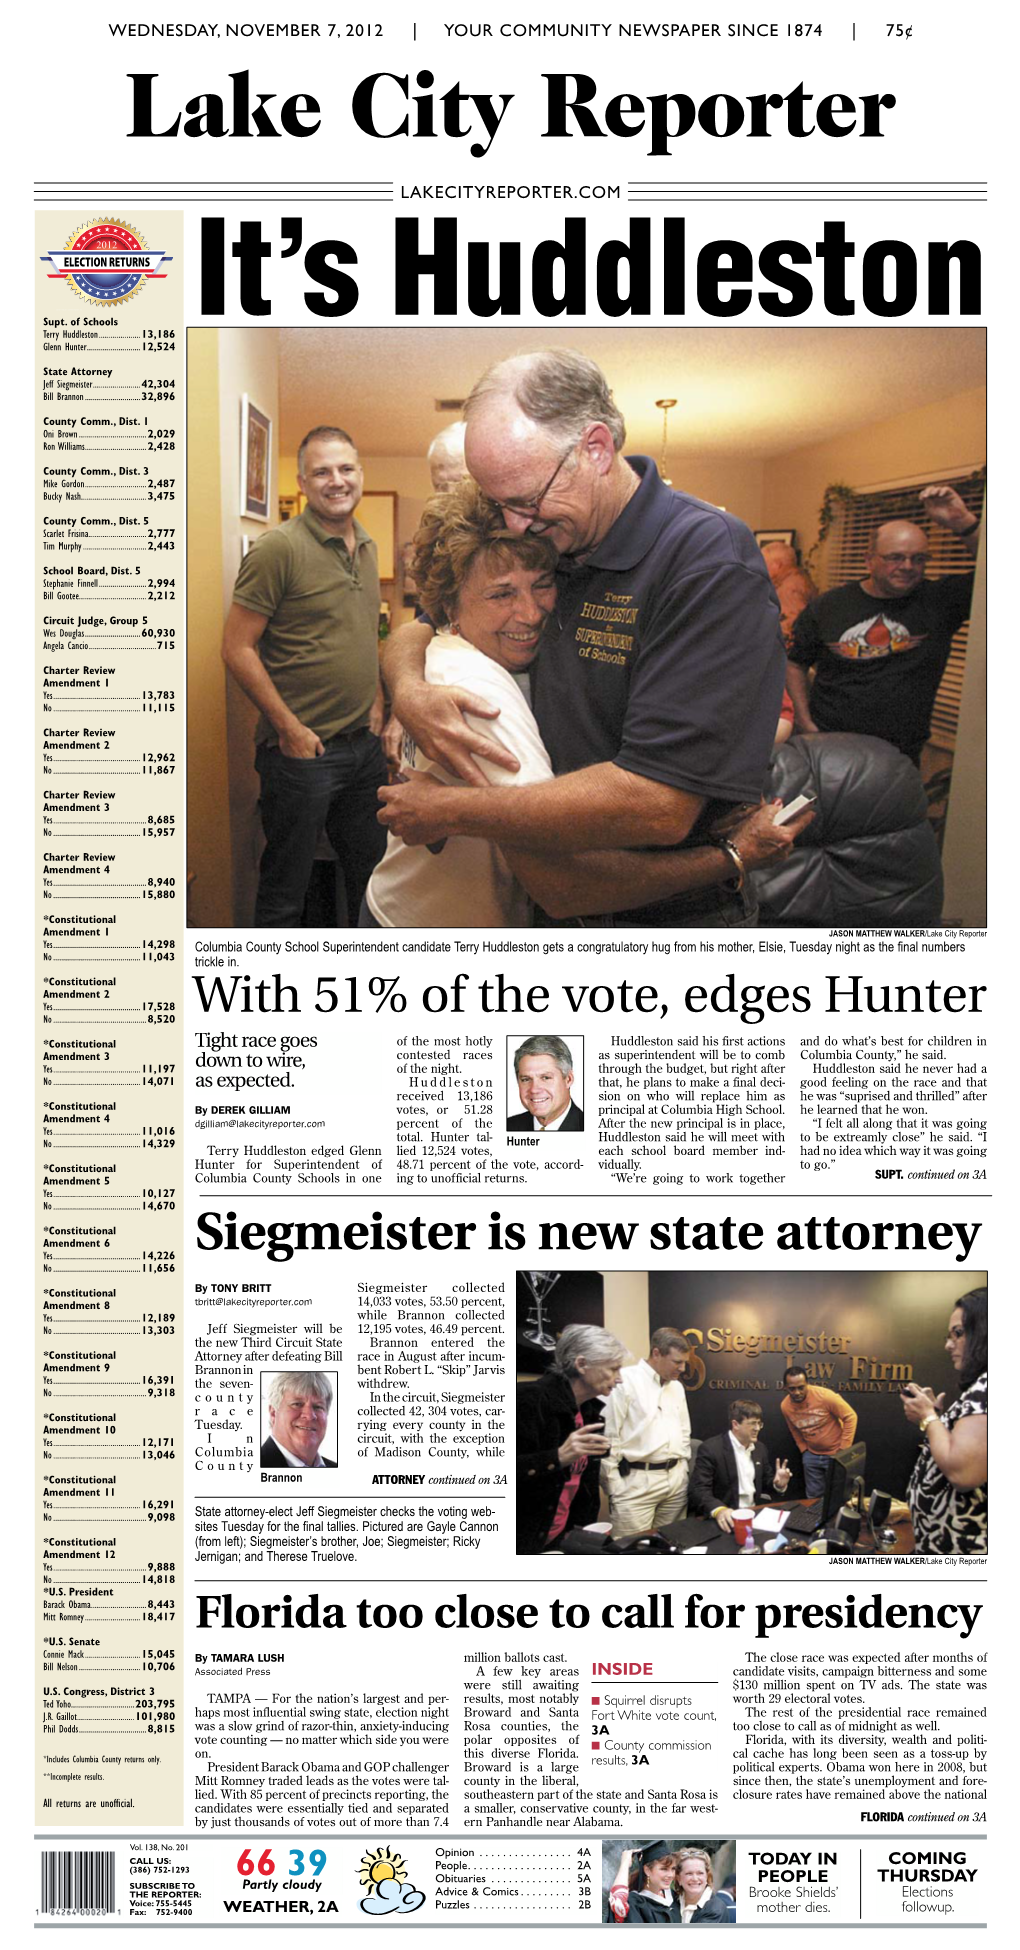 Siegmeister Is New State Attorney Yes